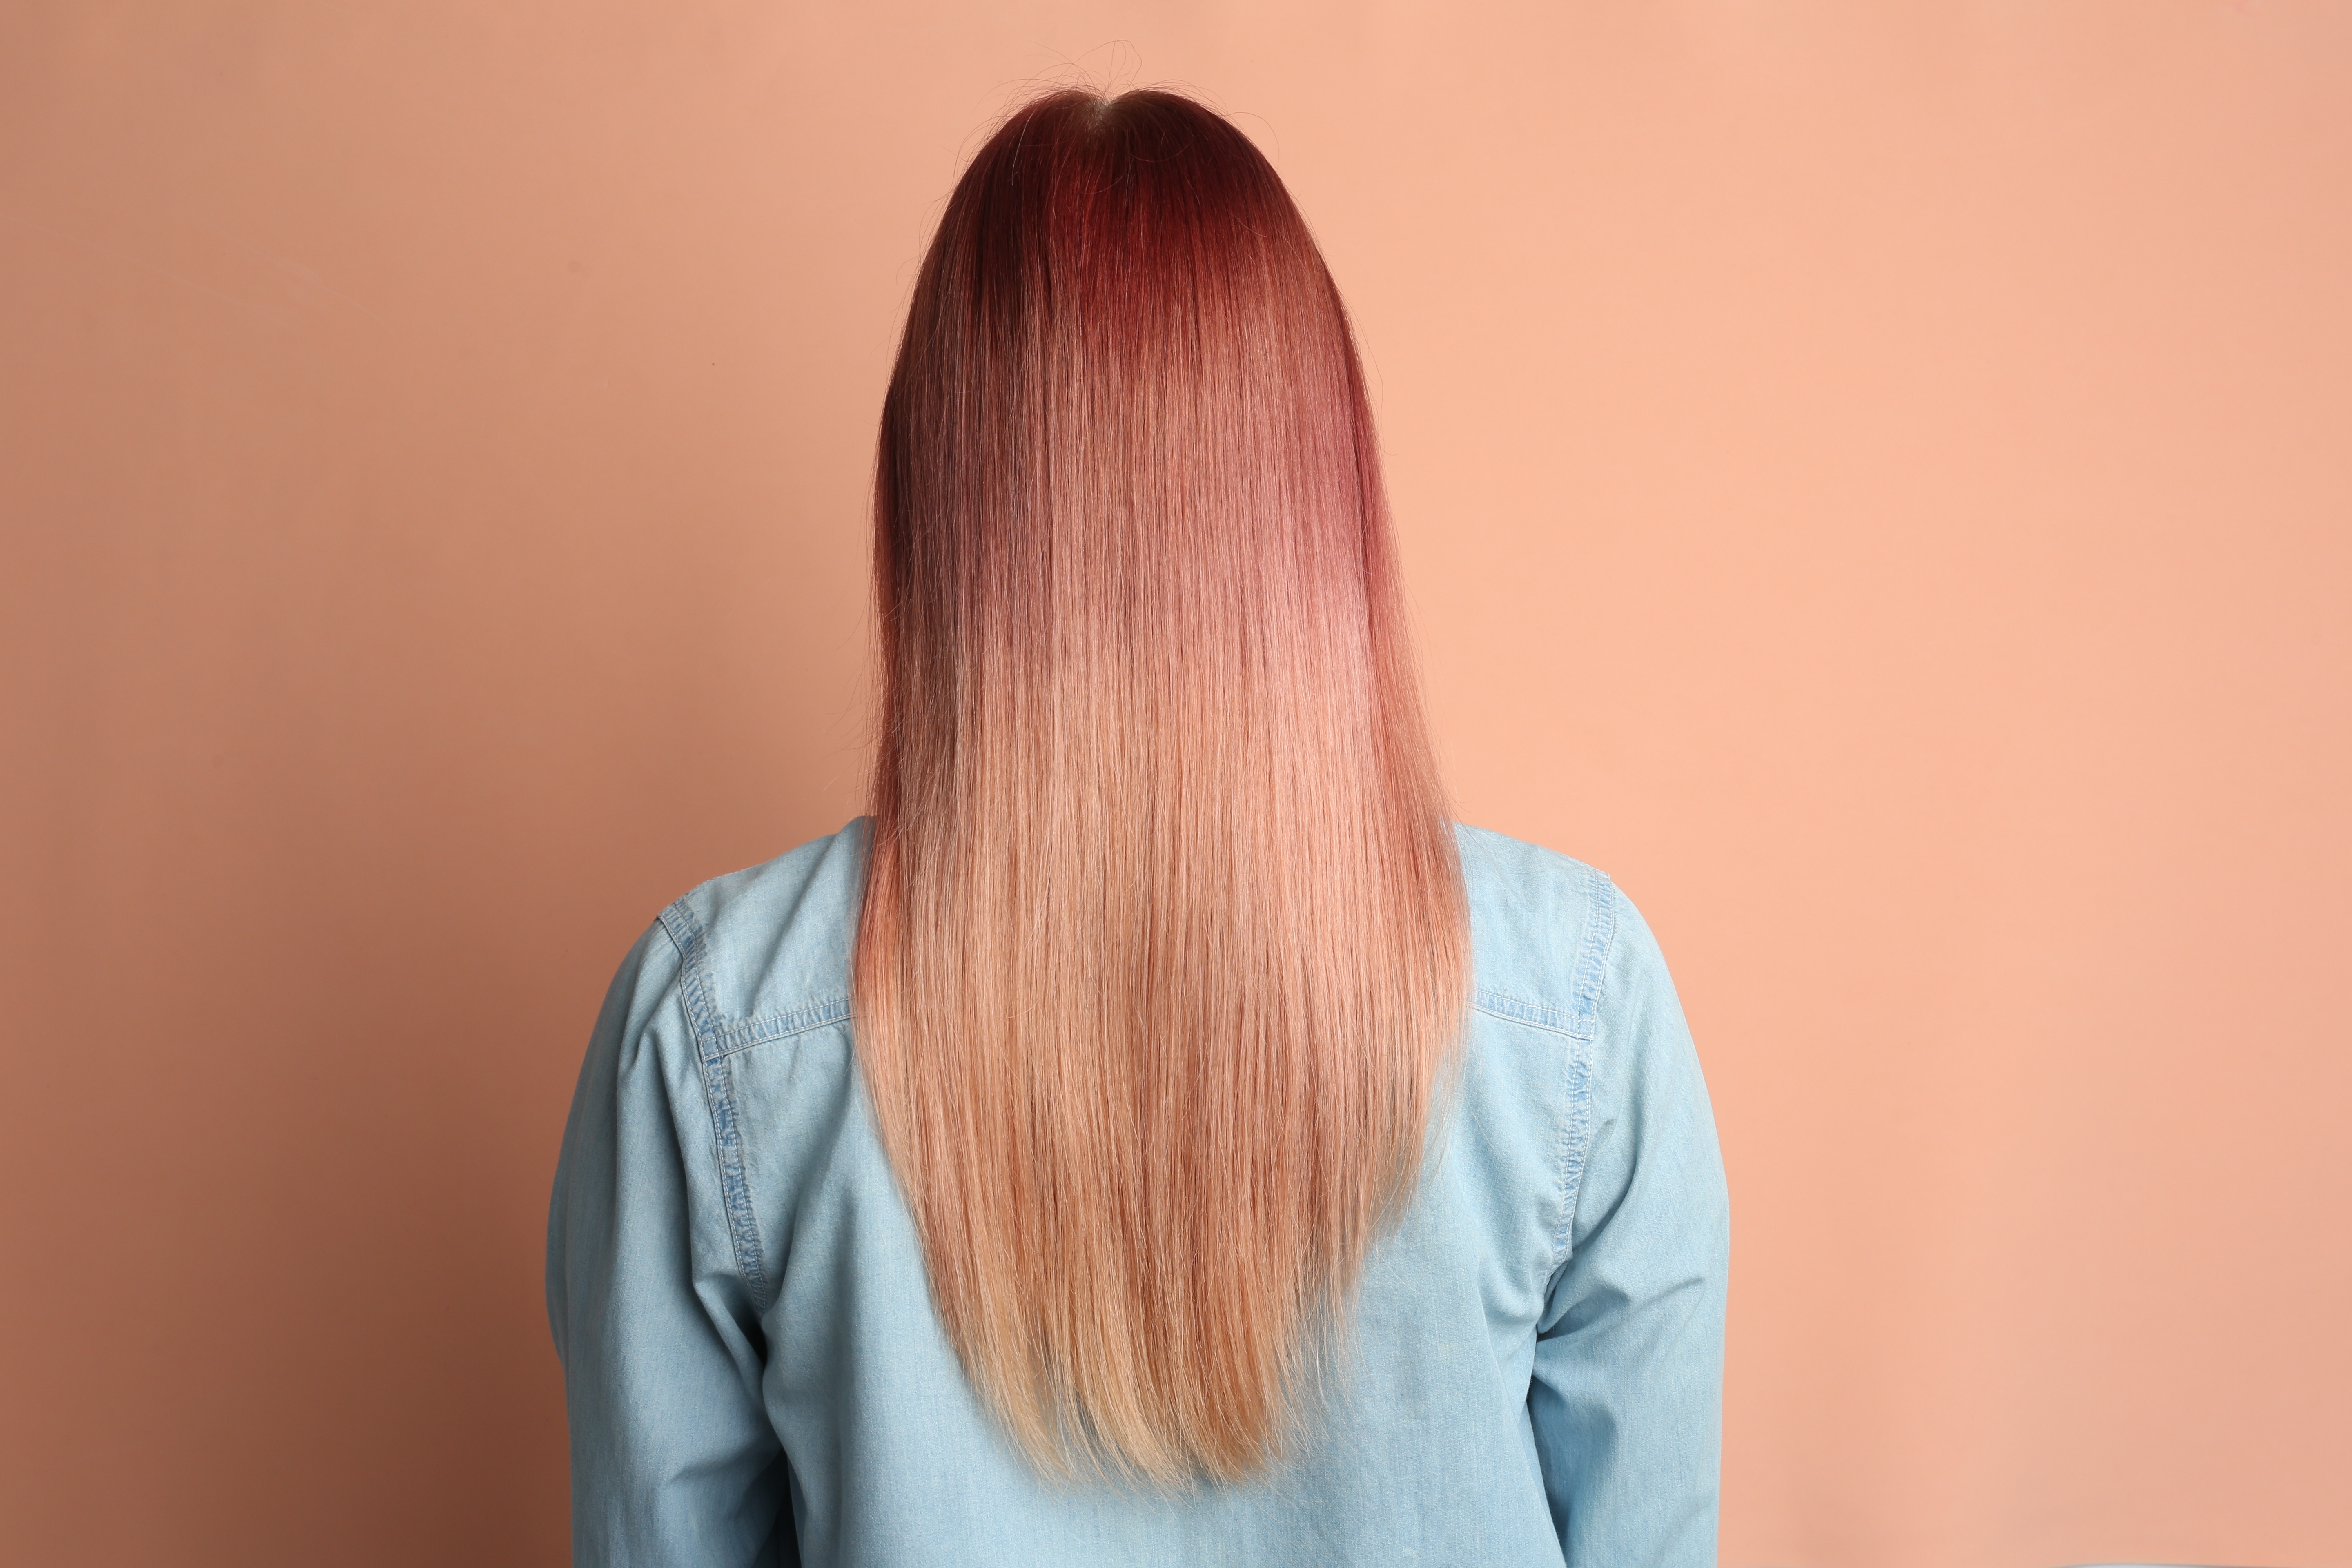 Woman with straight rose gold hair | Source: Shutterstock